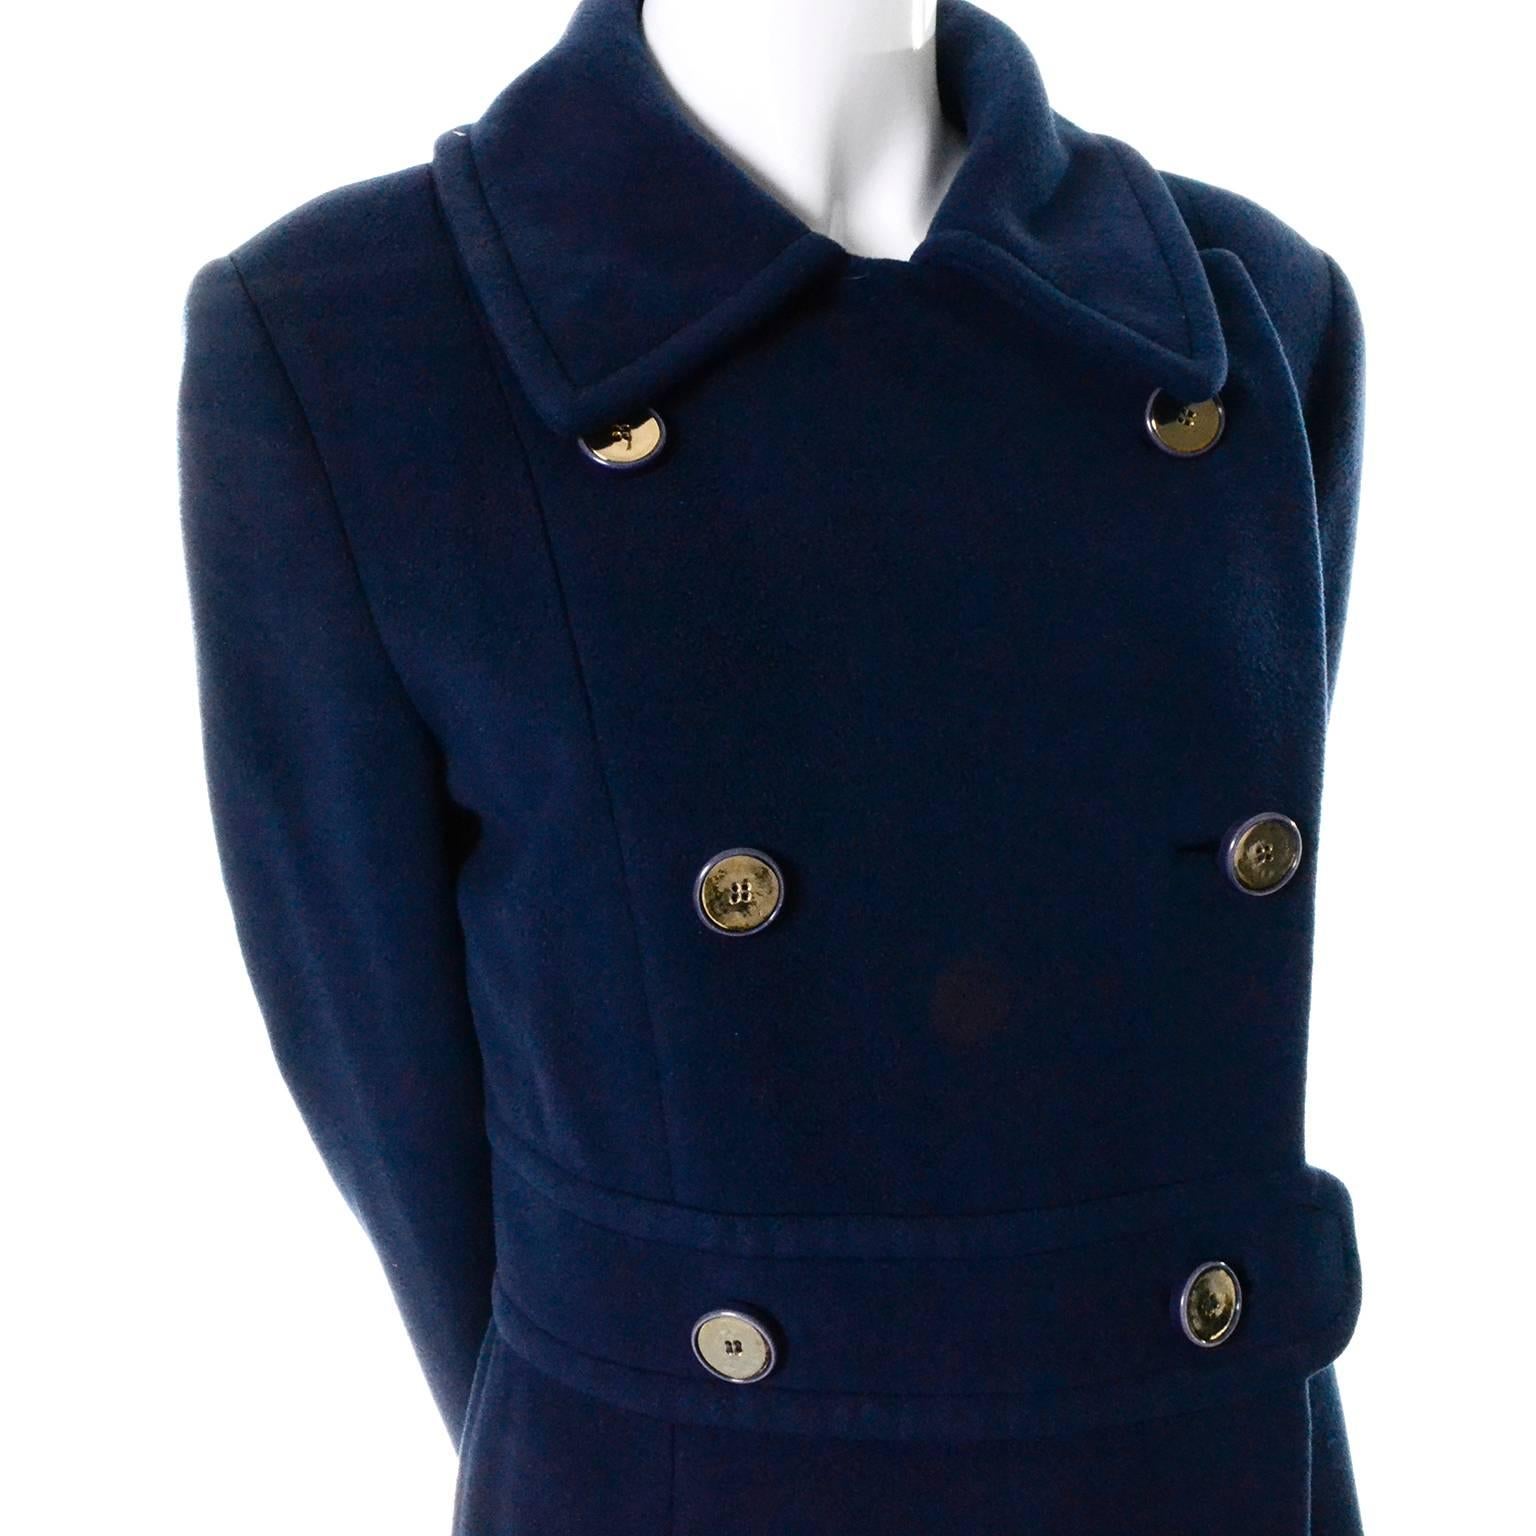 This vintage coat was purchased at I Magnin in the late 1960's or early 1970's and is made of a luxe deep royal blue cashmere.  This double breasted vintage coat has front pockets and is fully lined in blue silk. This is a gorgeous coat and I